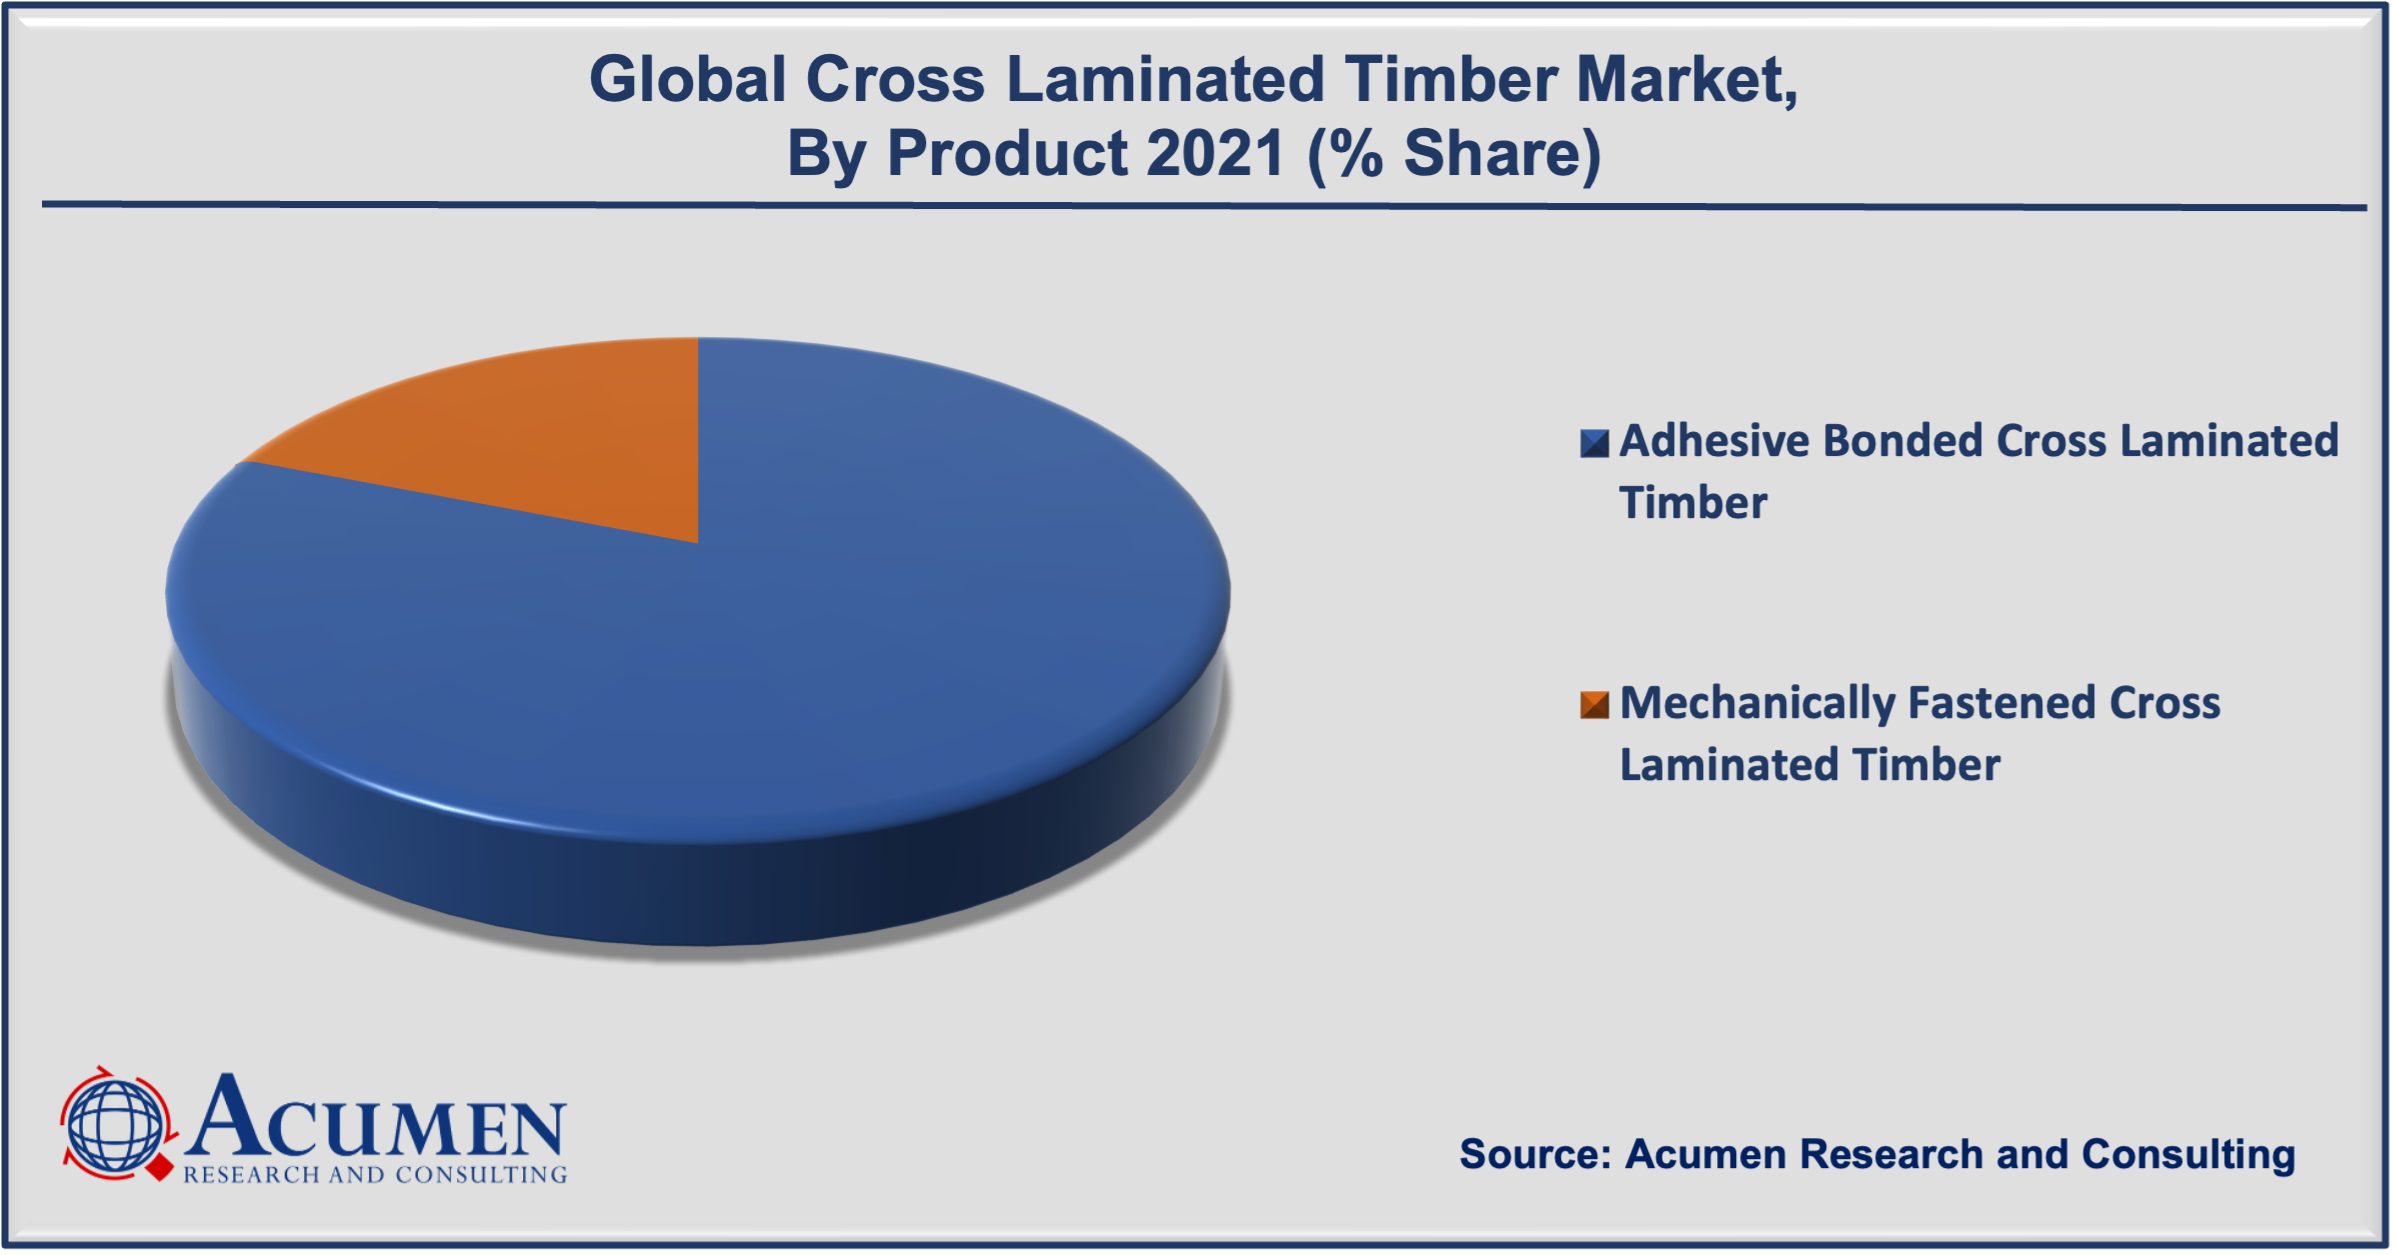 Cross Laminated Timber Market Share accounted for USD 1,037 Million in 2021 and is expected to reach USD 3,202 Million by 2030 with a considerable CAGR of 13.8% during the forecast timeframe from 2022 to 2030.